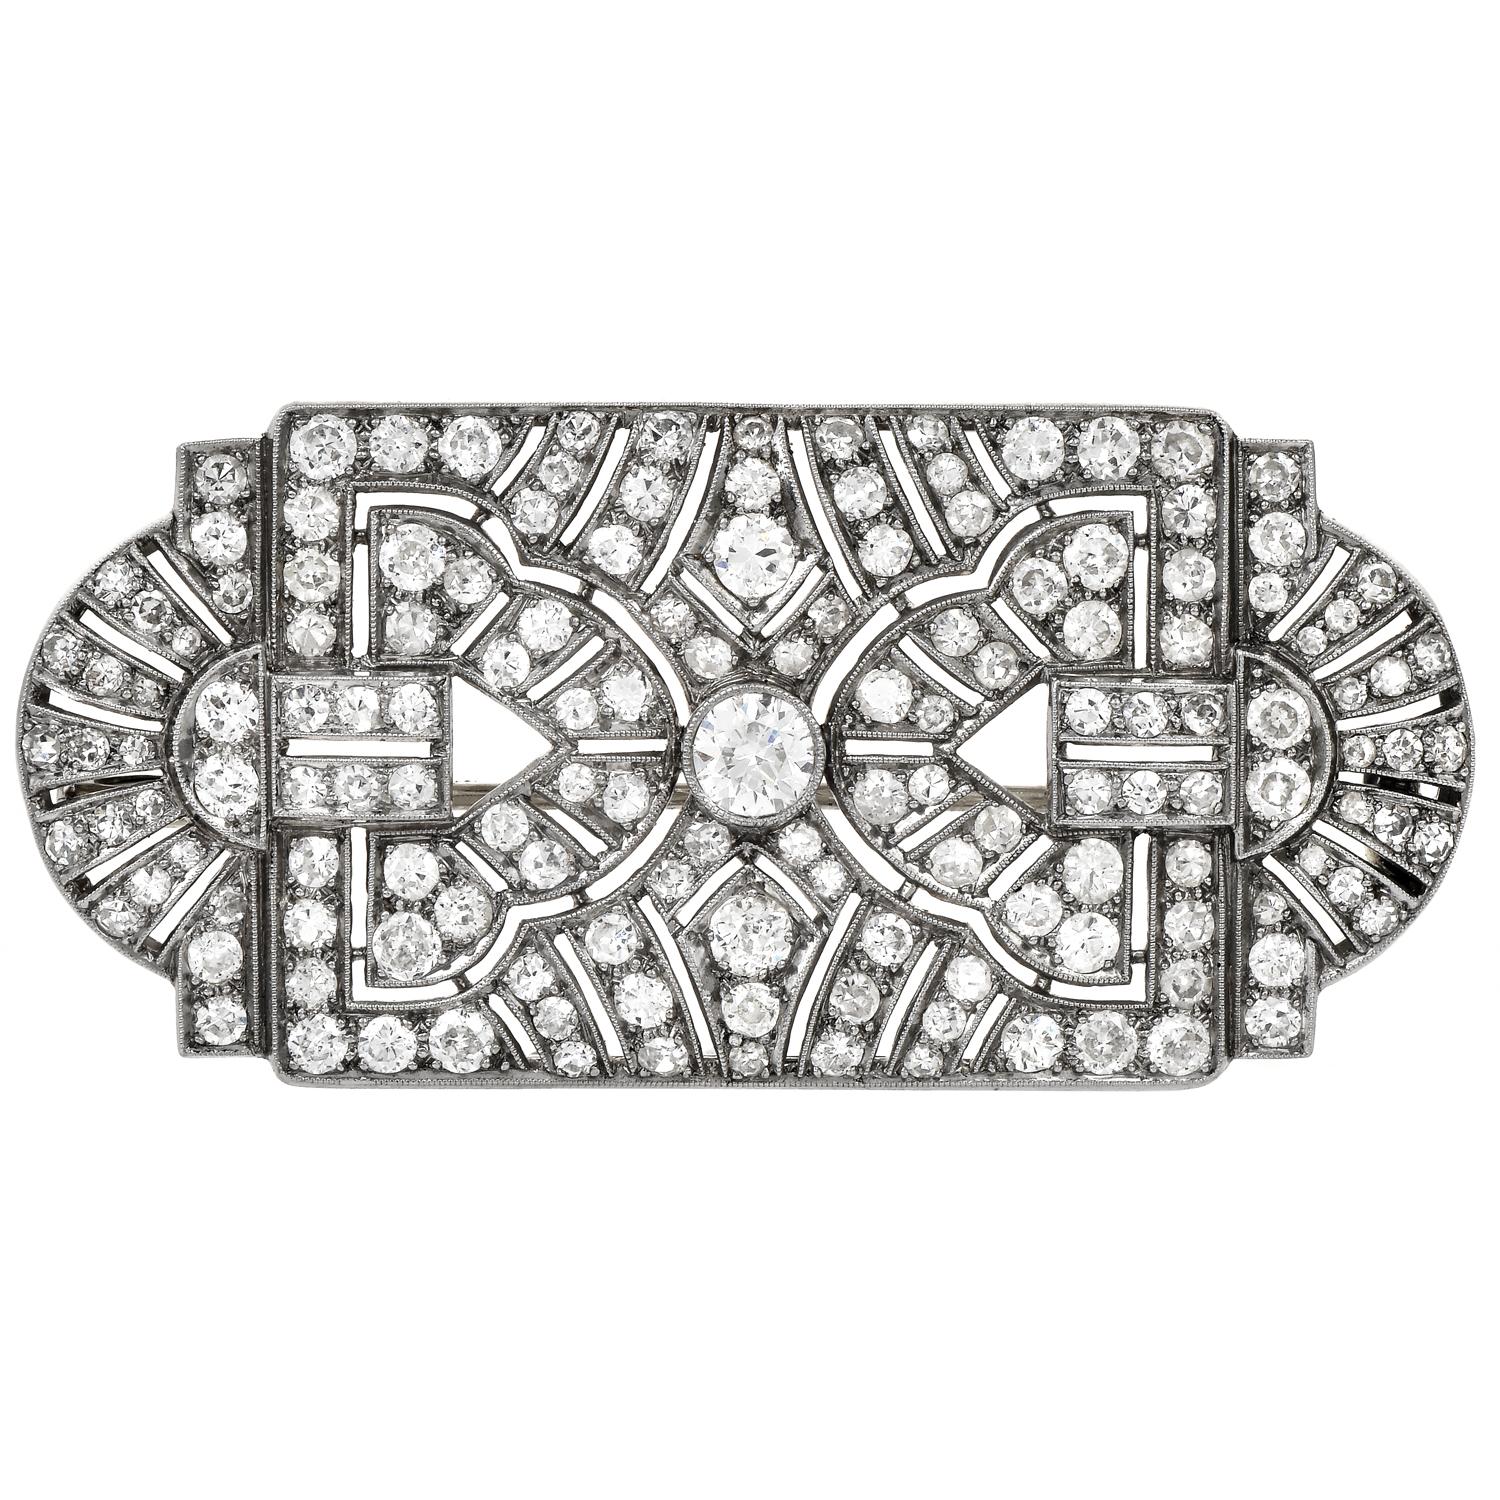 An Exquisite Vintage Art Deco Diamond Platinum Brooch Pin,

Dazzle yourself with the sparkle on this exquisite piece with Icy White Diamonds.

Exquisitely crafted in solid platinum, the open pattern is created by Genuine Diamonds.

Genuine Round Cut